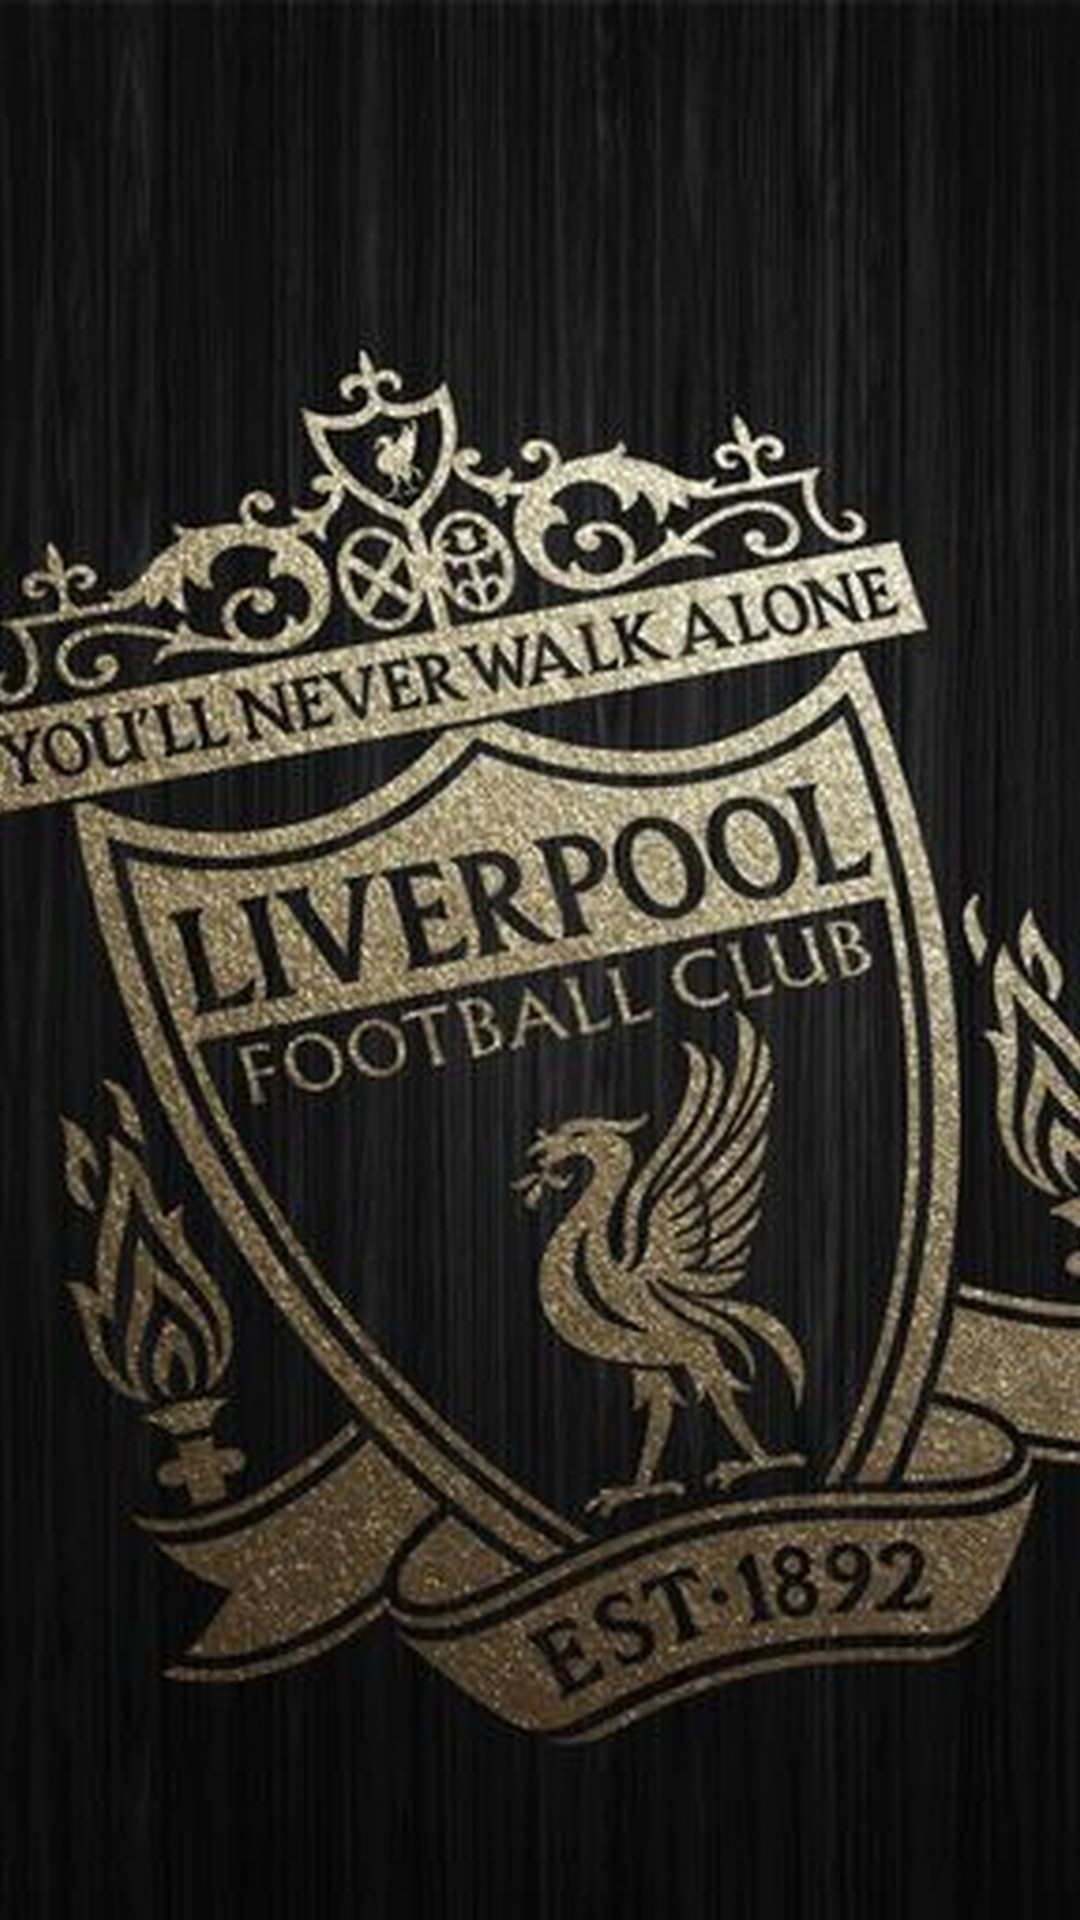 Liverpool Football Club: The team's badge is based on the city's liver bird symbol. 1080x1920 Full HD Wallpaper.